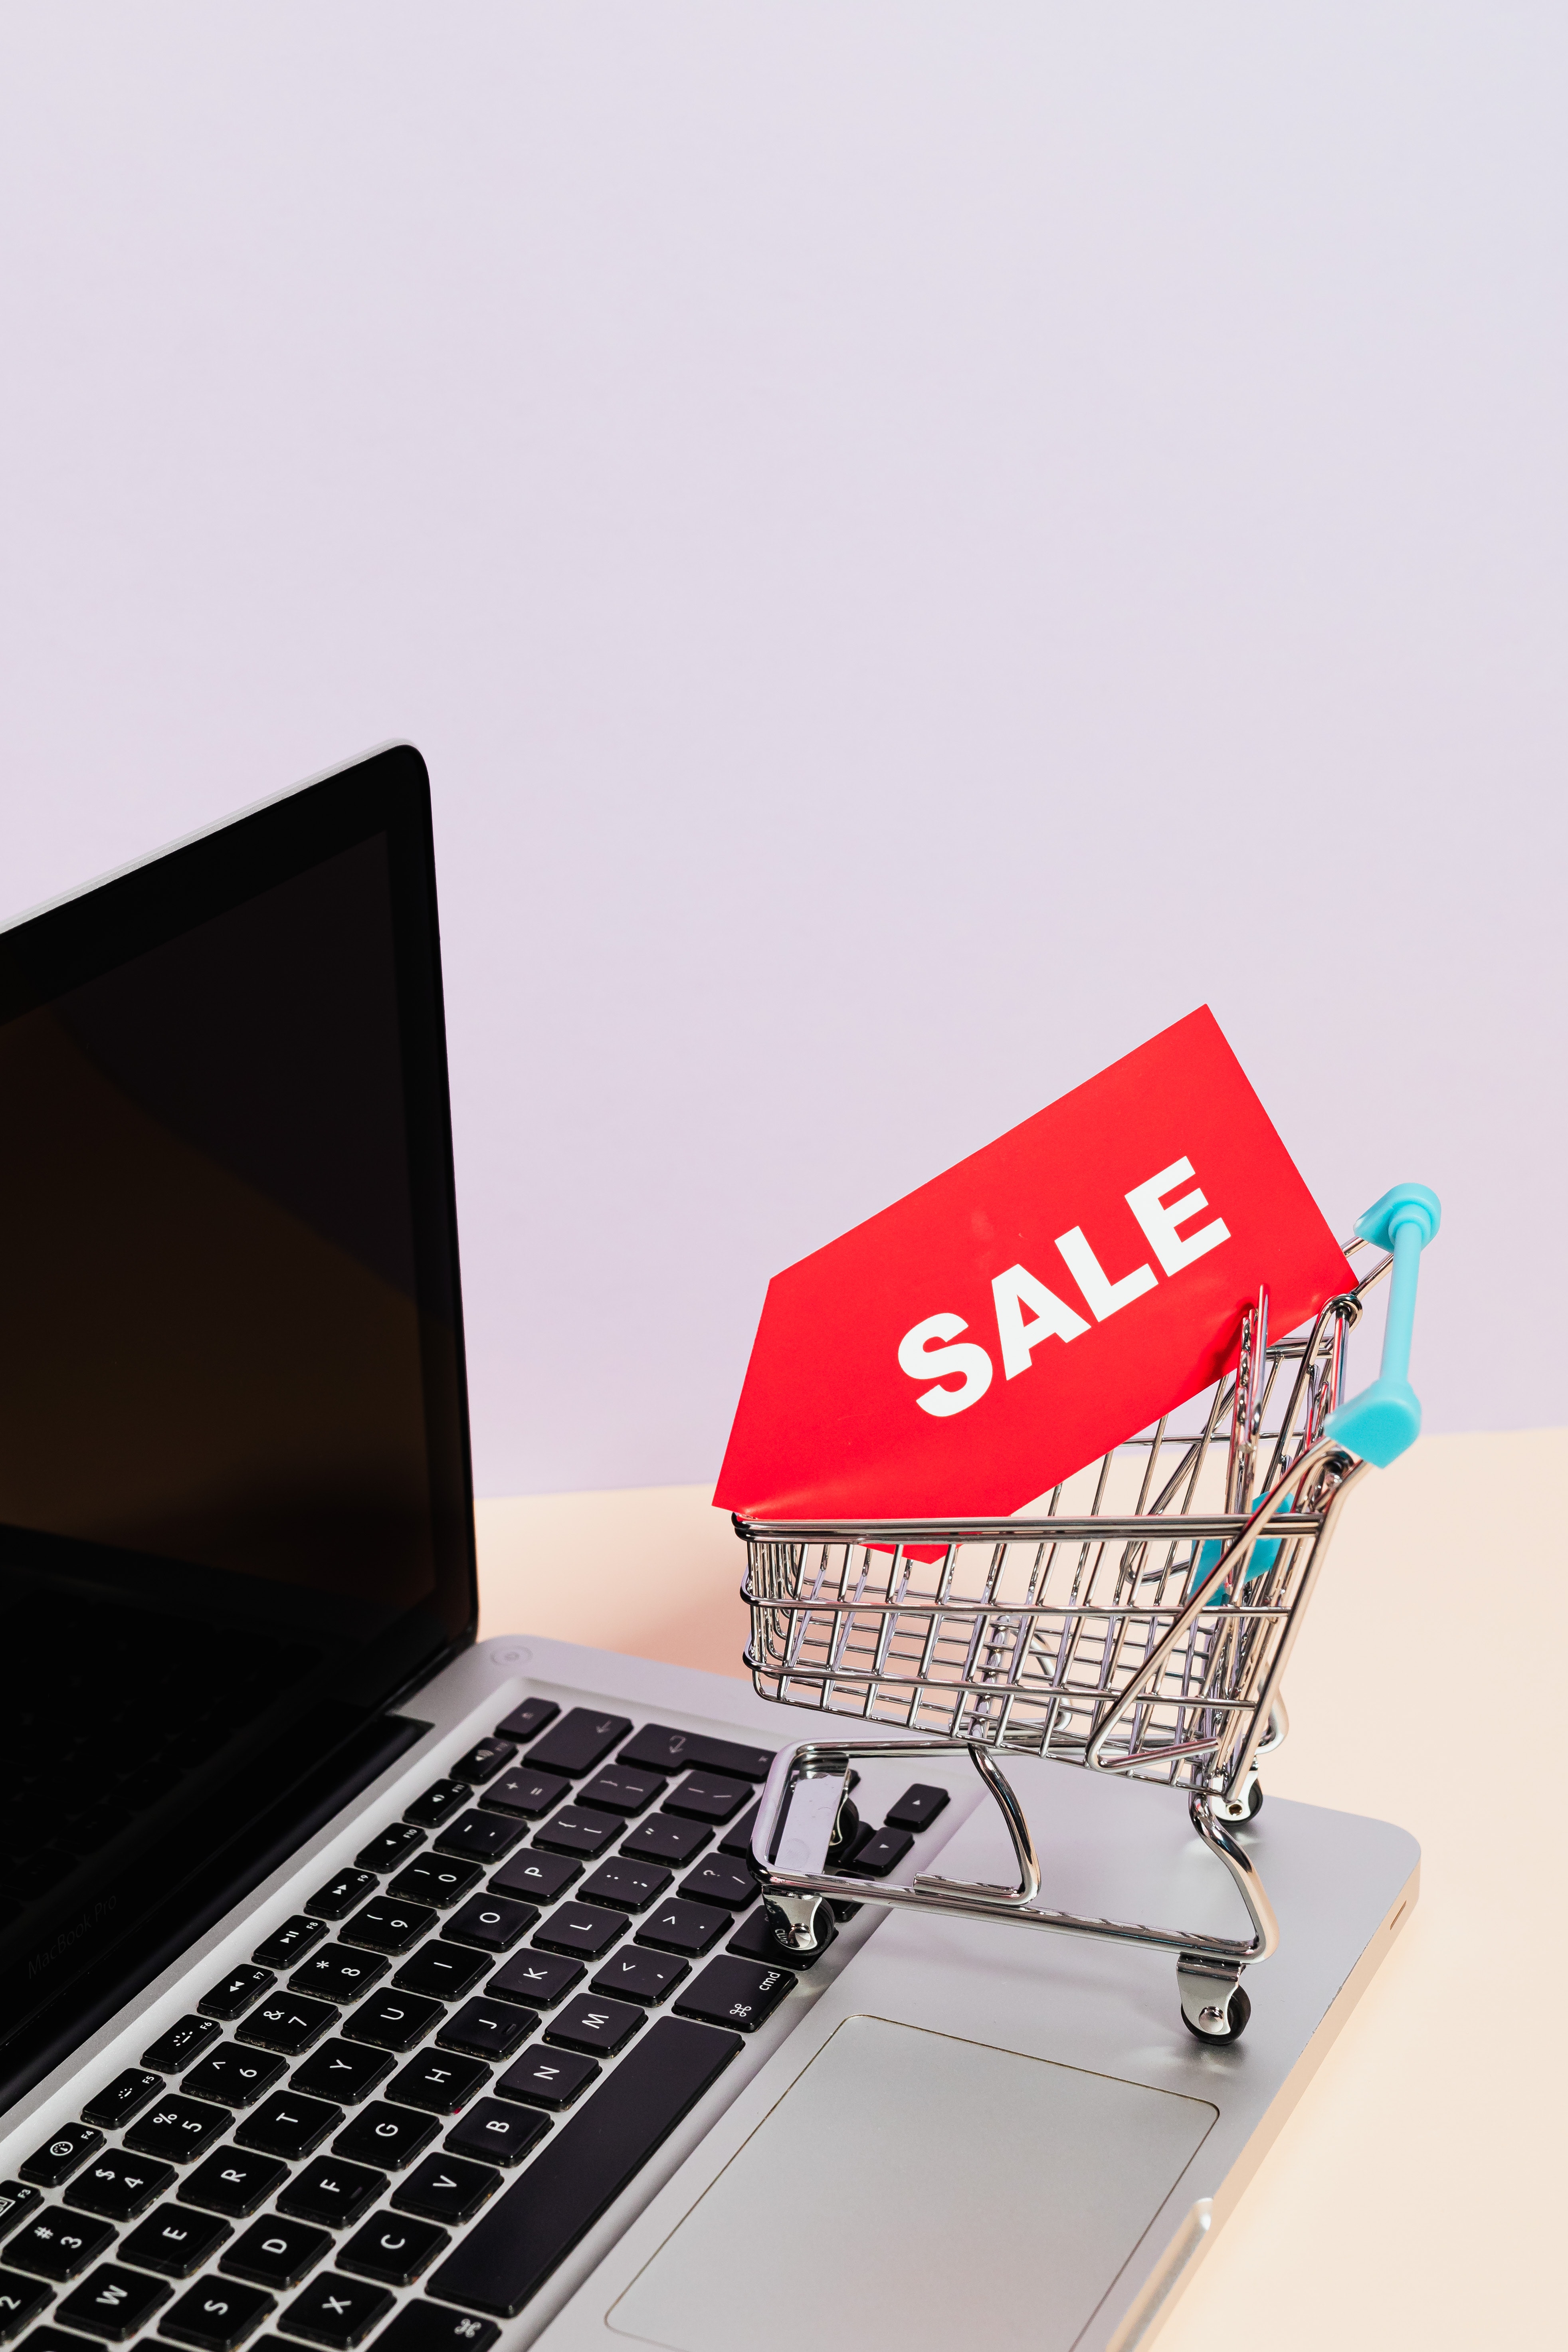 A red sale tag on a miniature shopping cart placed on a laptop | Source: Pexels